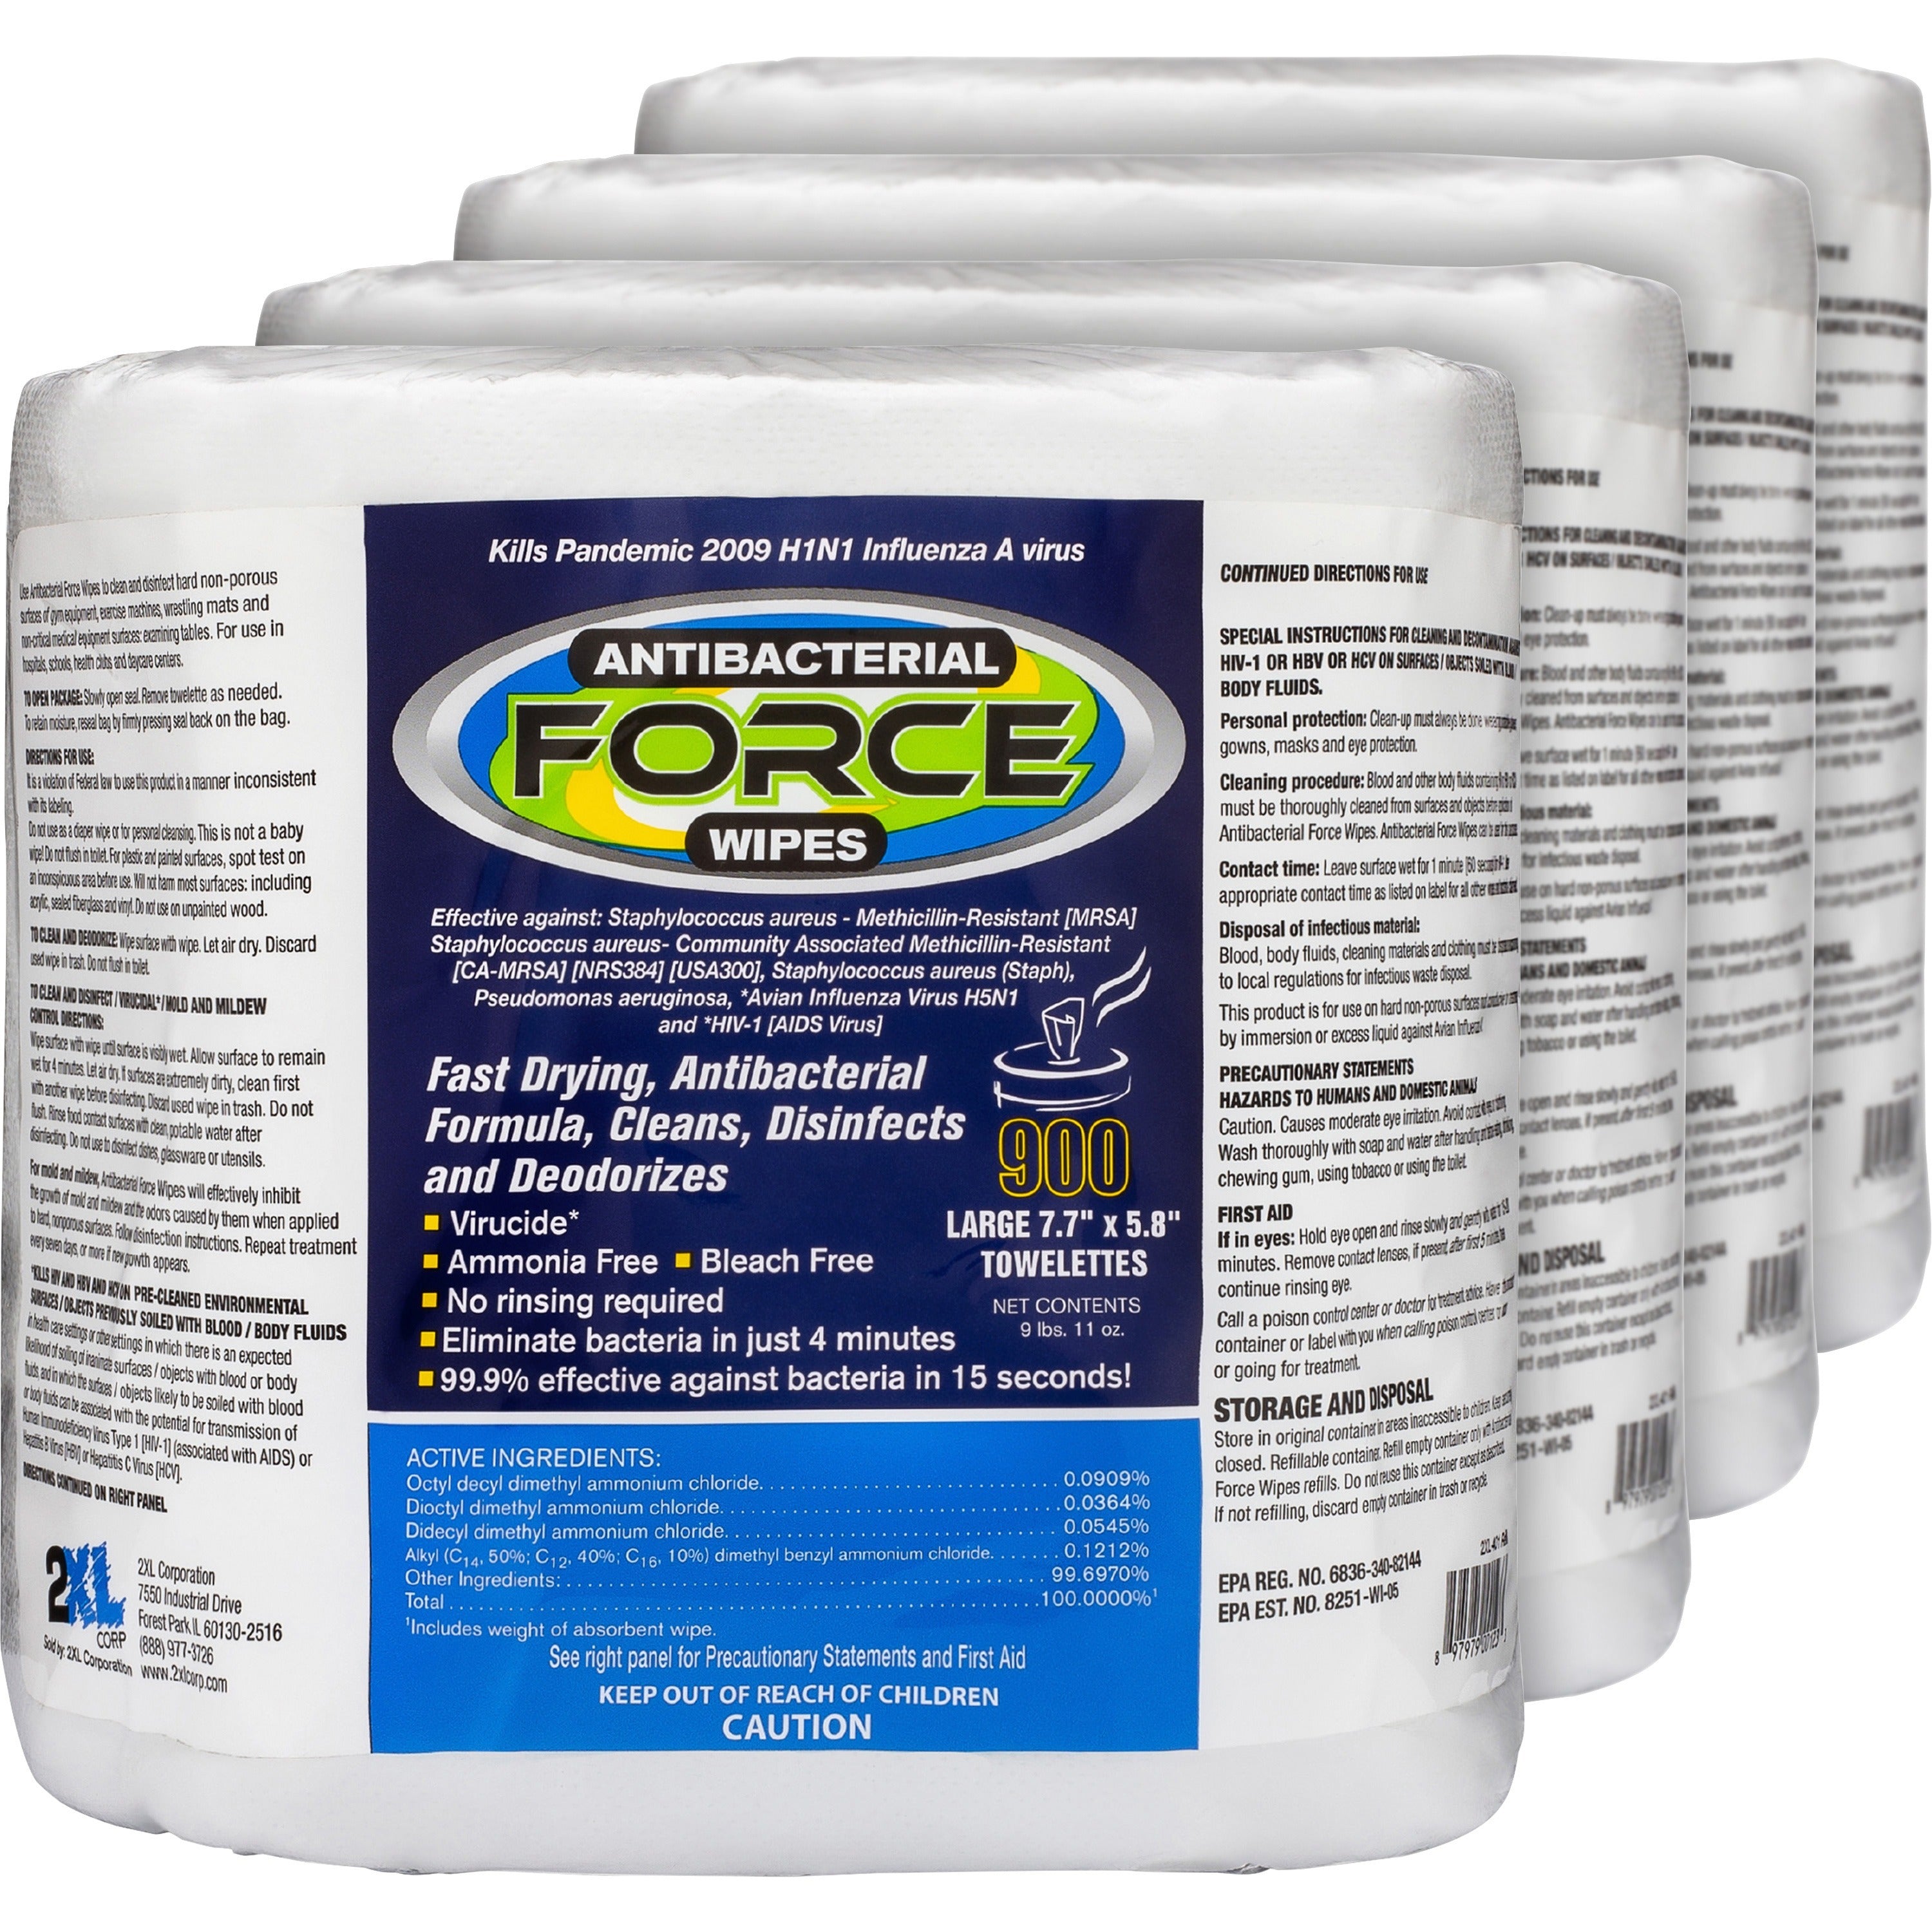 2xl-antibacterial-force-wipes-bucket-refill-900-bag-4-carton-non-irritating-soft-hygienic-durable-absorbent-anti-bacterial-disposable-disinfectant-non-irritating-absorbent-refillable-white_txll4014ct - 1